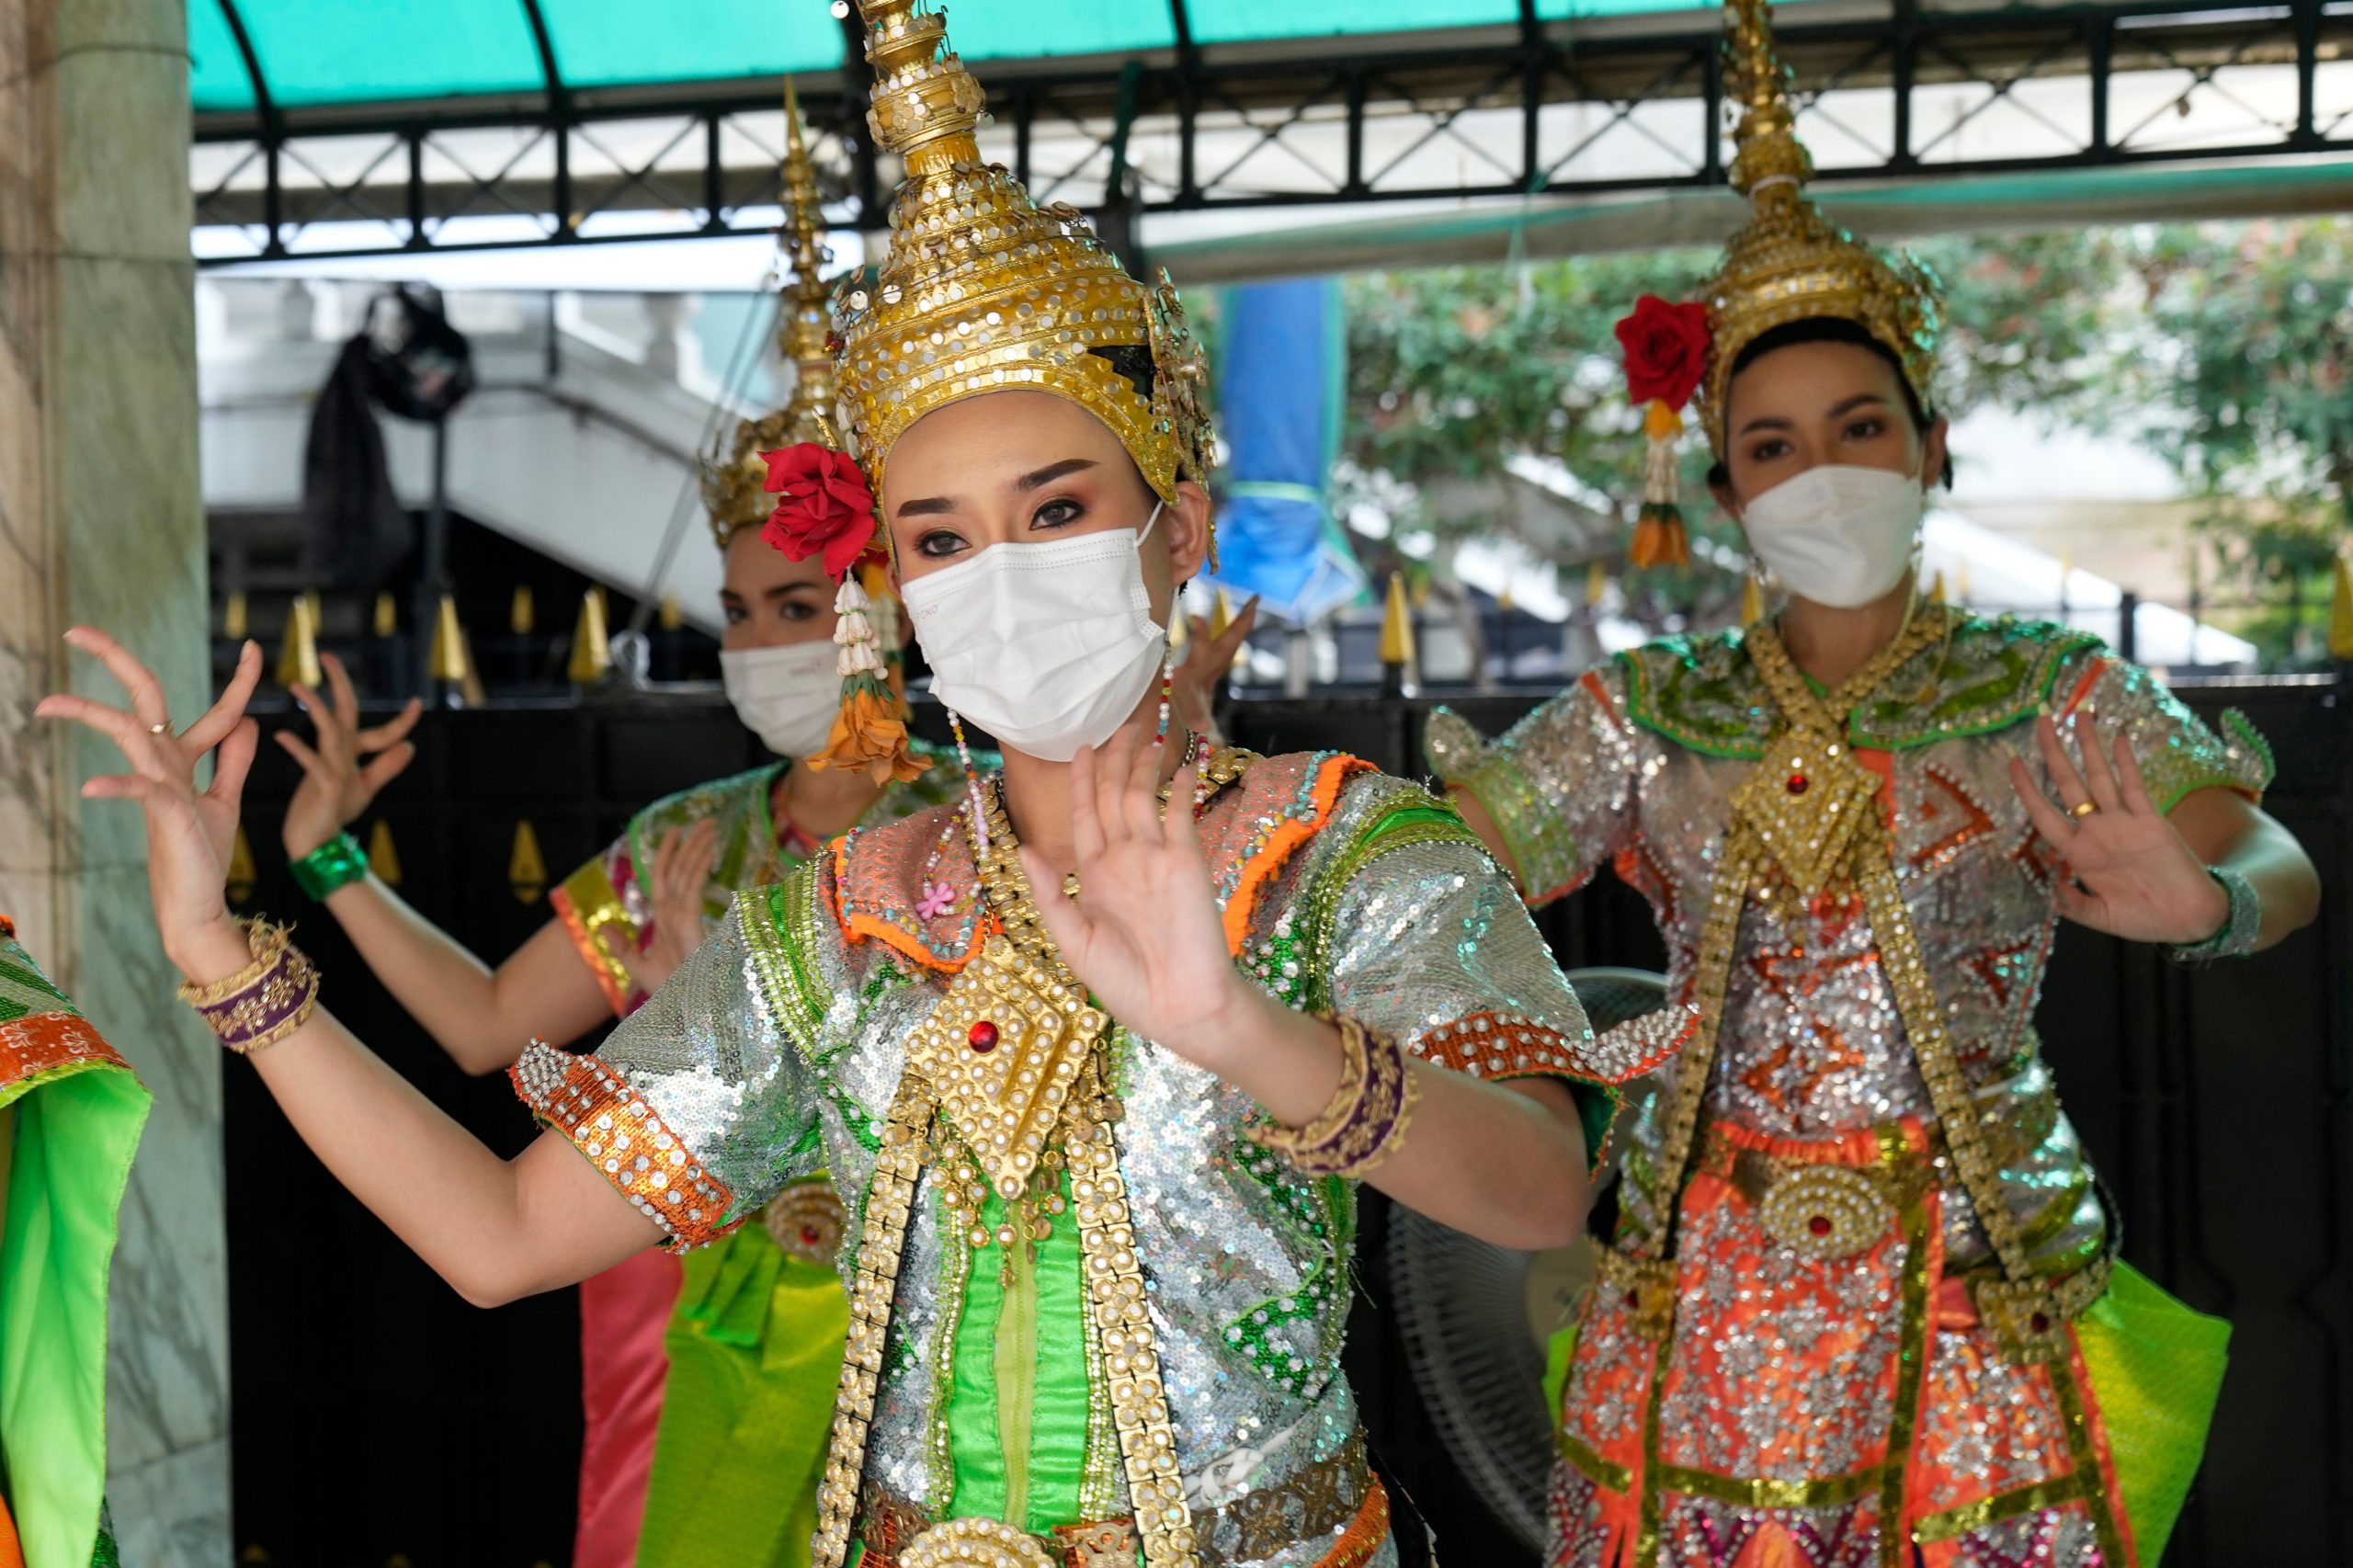 COVID-19: Across Asia, spike in virus cases follows Lunar New Year